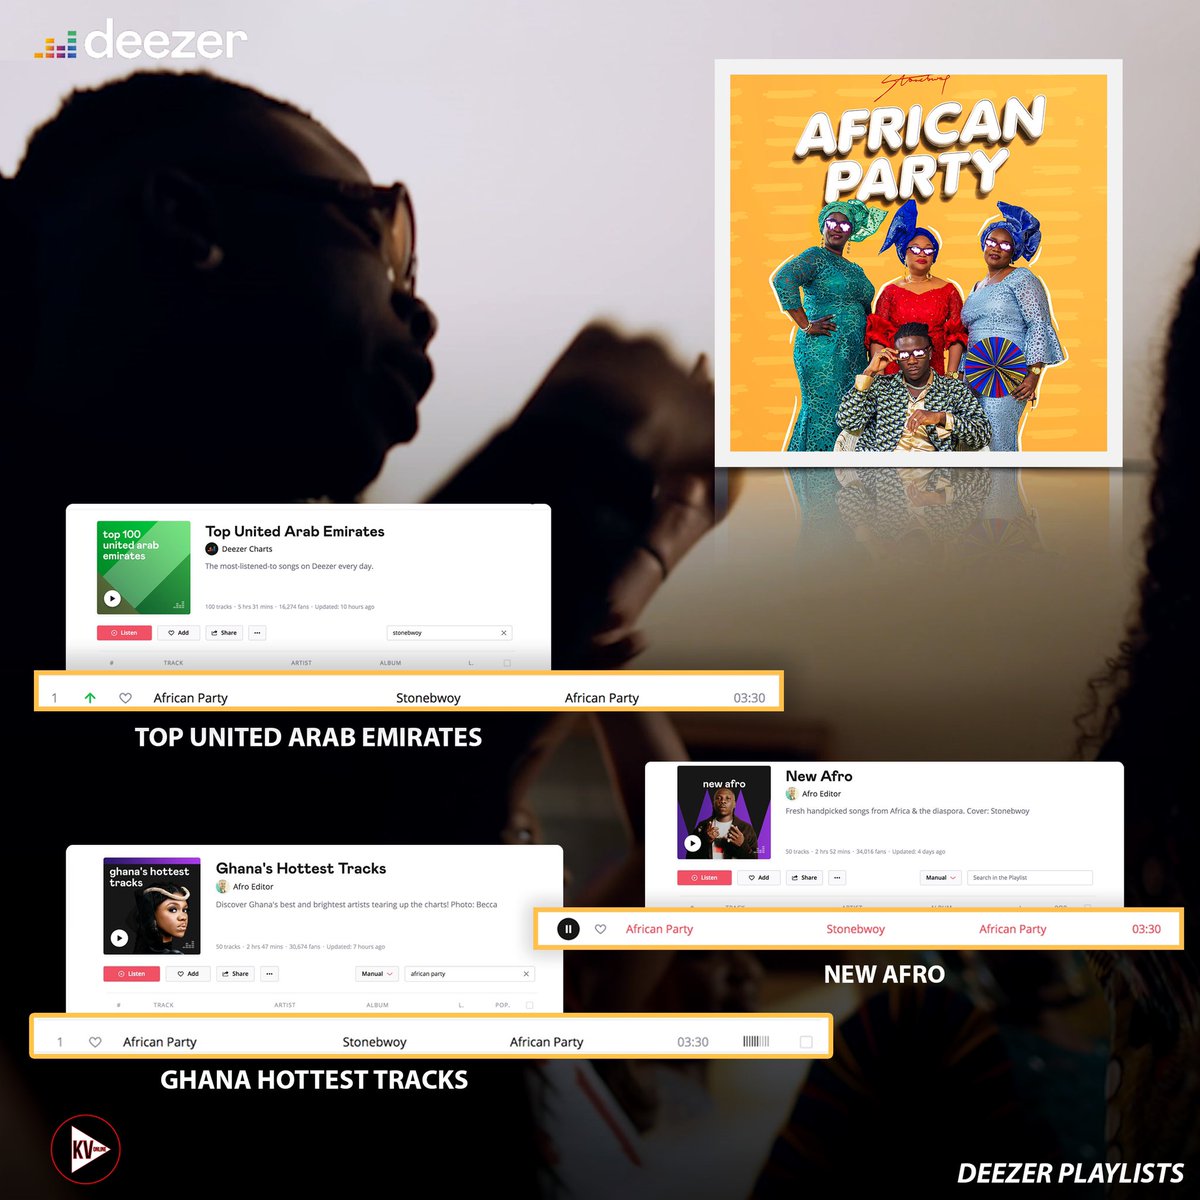 Get your dose of the hottest new music from Africa, now with #AfricanParty off #AnlogaJunction in the mix ... Stream #NewAfro on @deezer Deezer.lnk.to/NewAfro▶️